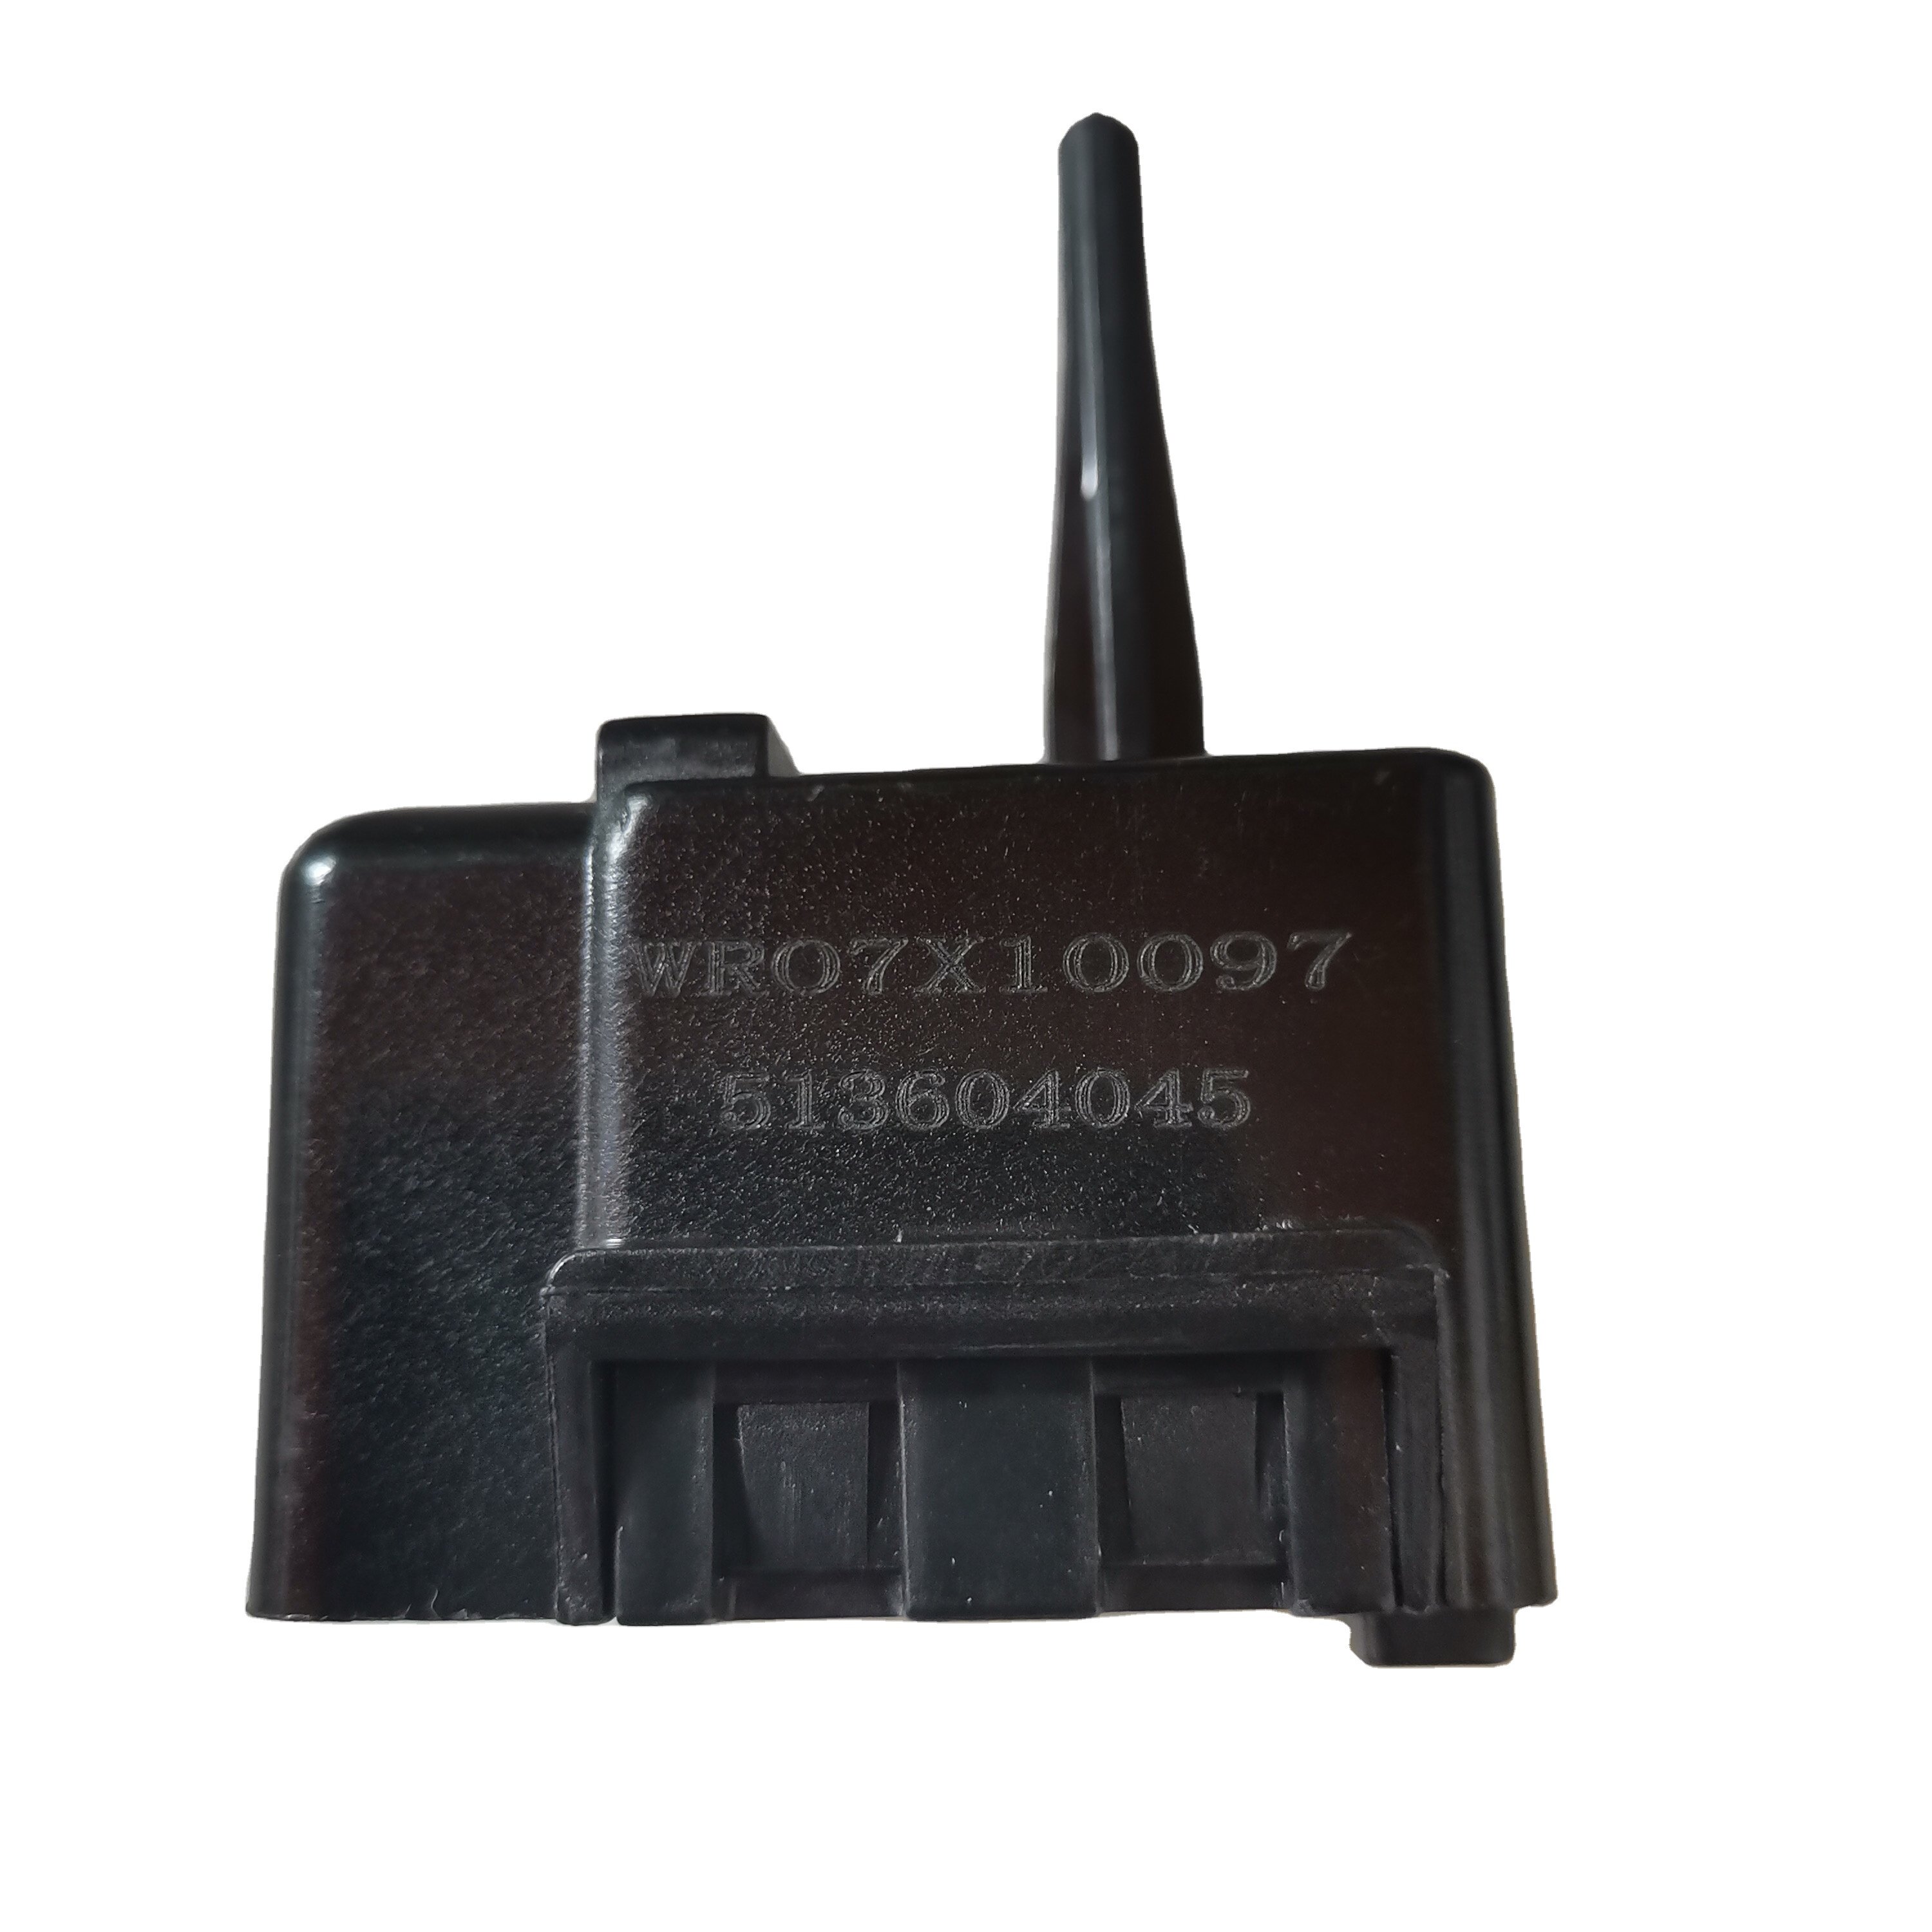 LONGTERM WR07X10097 Relay and Overload Assembly Replacement Part for GE refrigerator